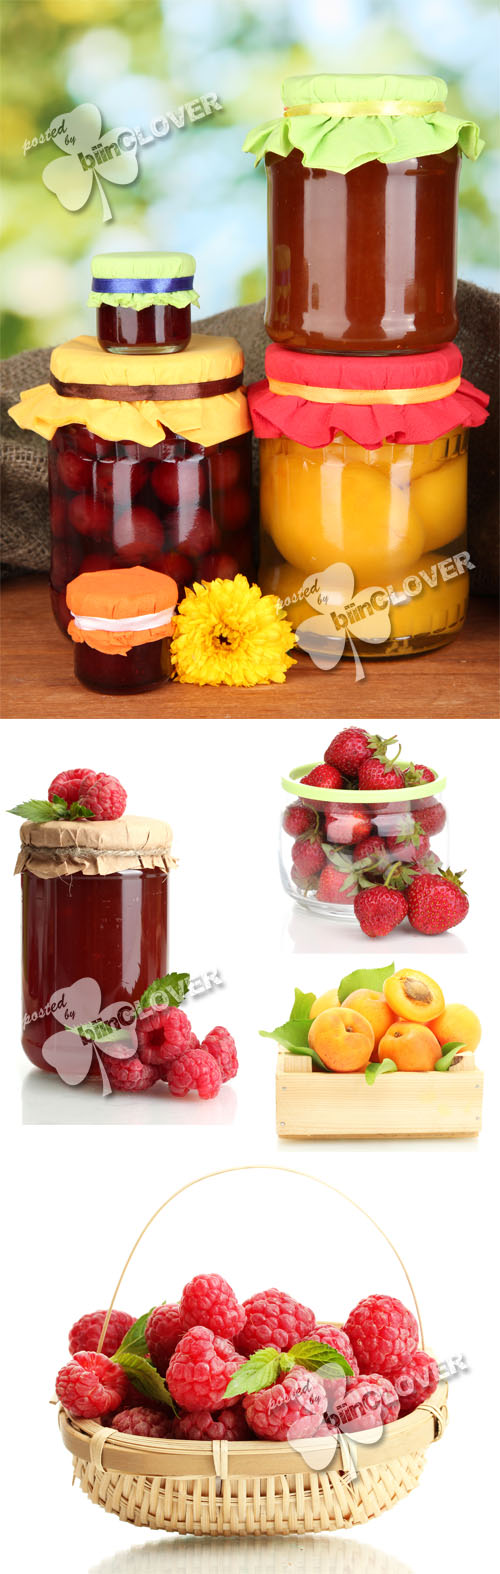 Tasty fruits and jam 0256